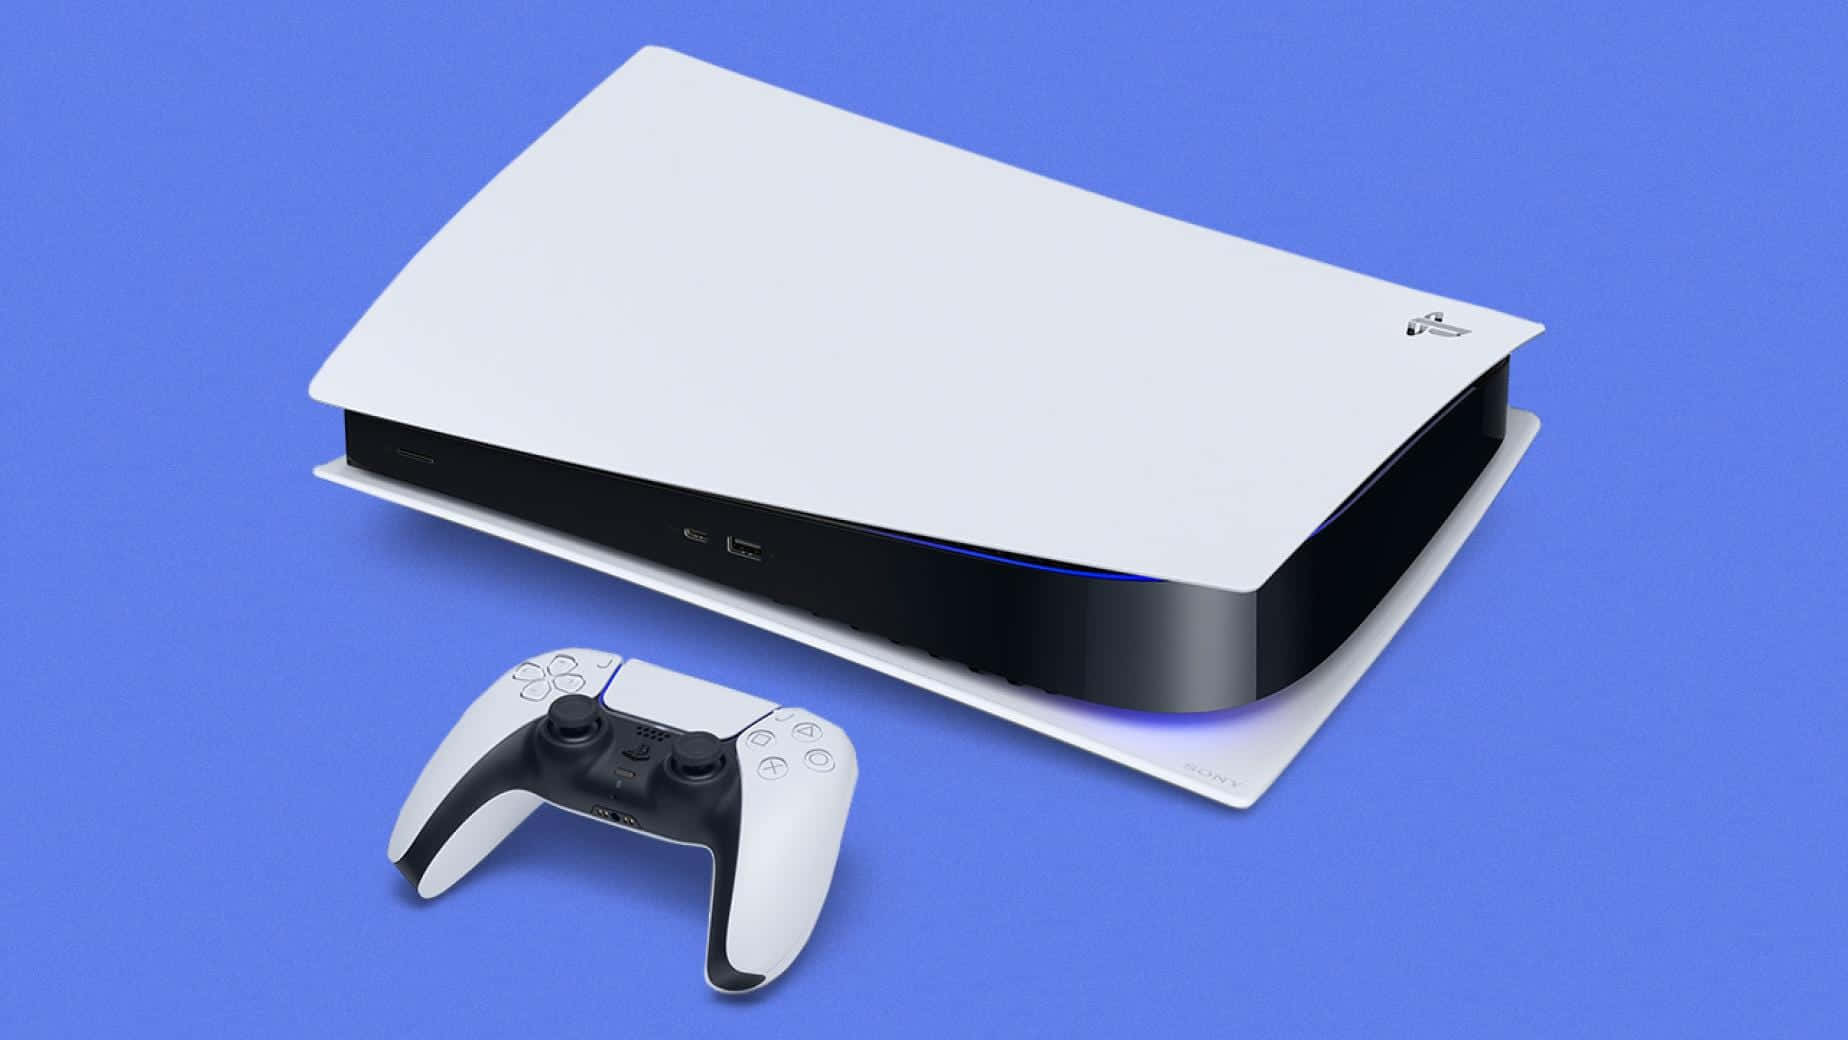 The Future of Gaming - The Playstation 5